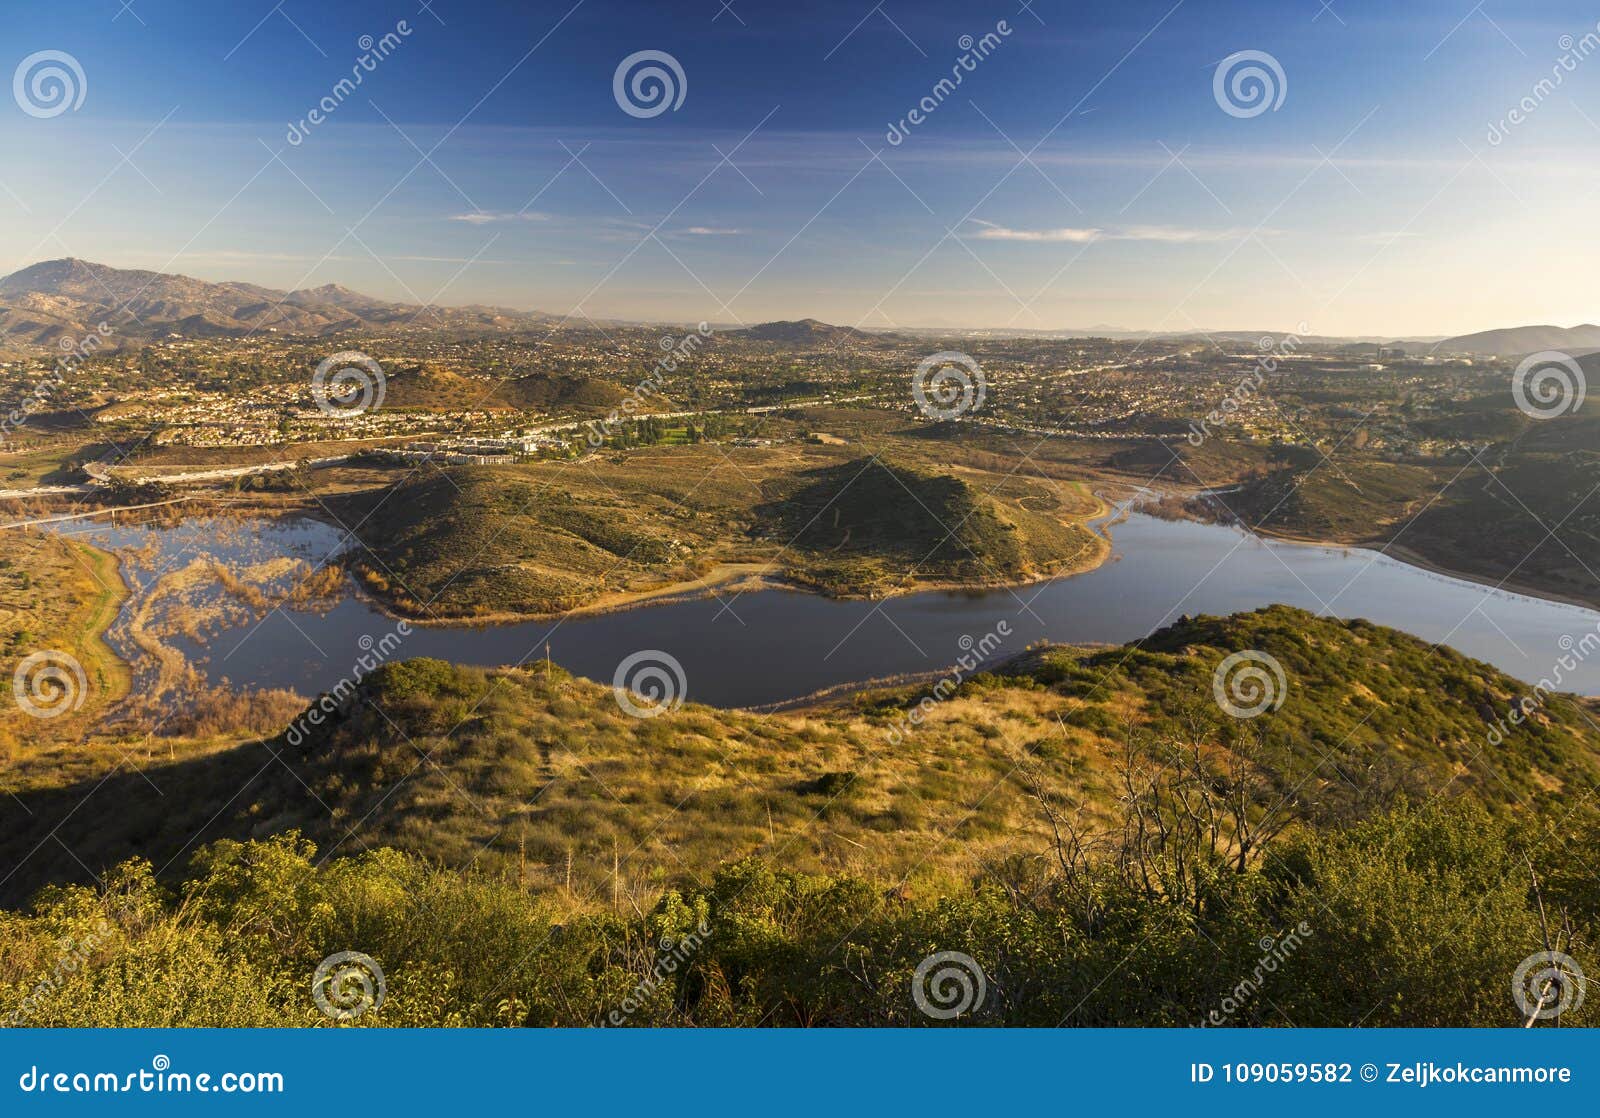 lake hodges and san diego county panorama from summit of bernardo mountain in poway